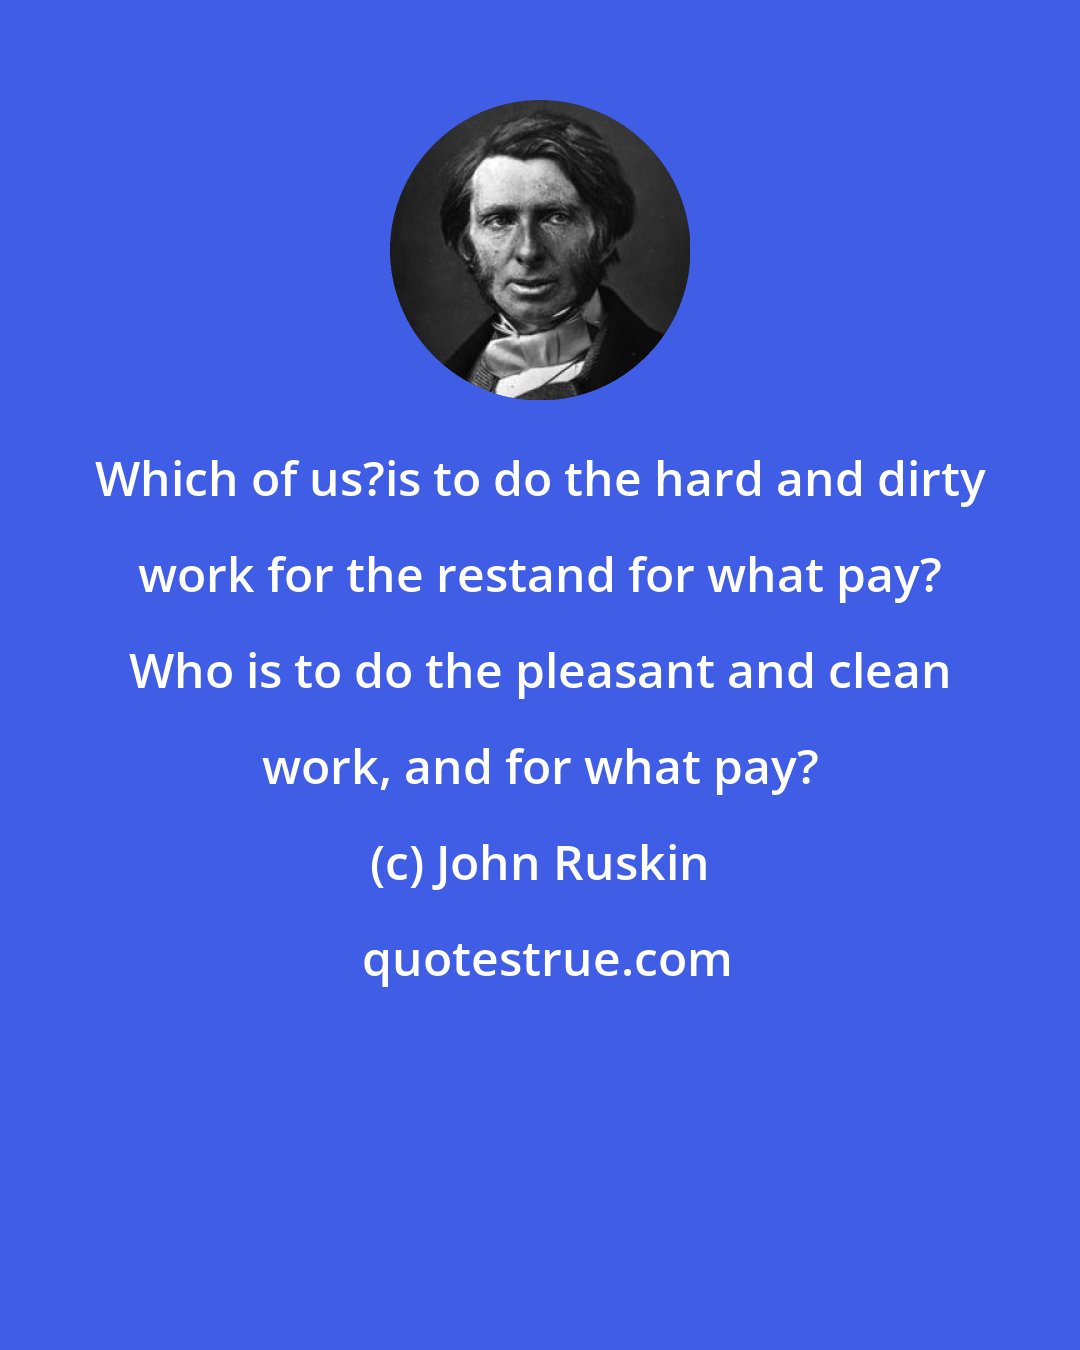 John Ruskin: Which of us?is to do the hard and dirty work for the restand for what pay? Who is to do the pleasant and clean work, and for what pay?